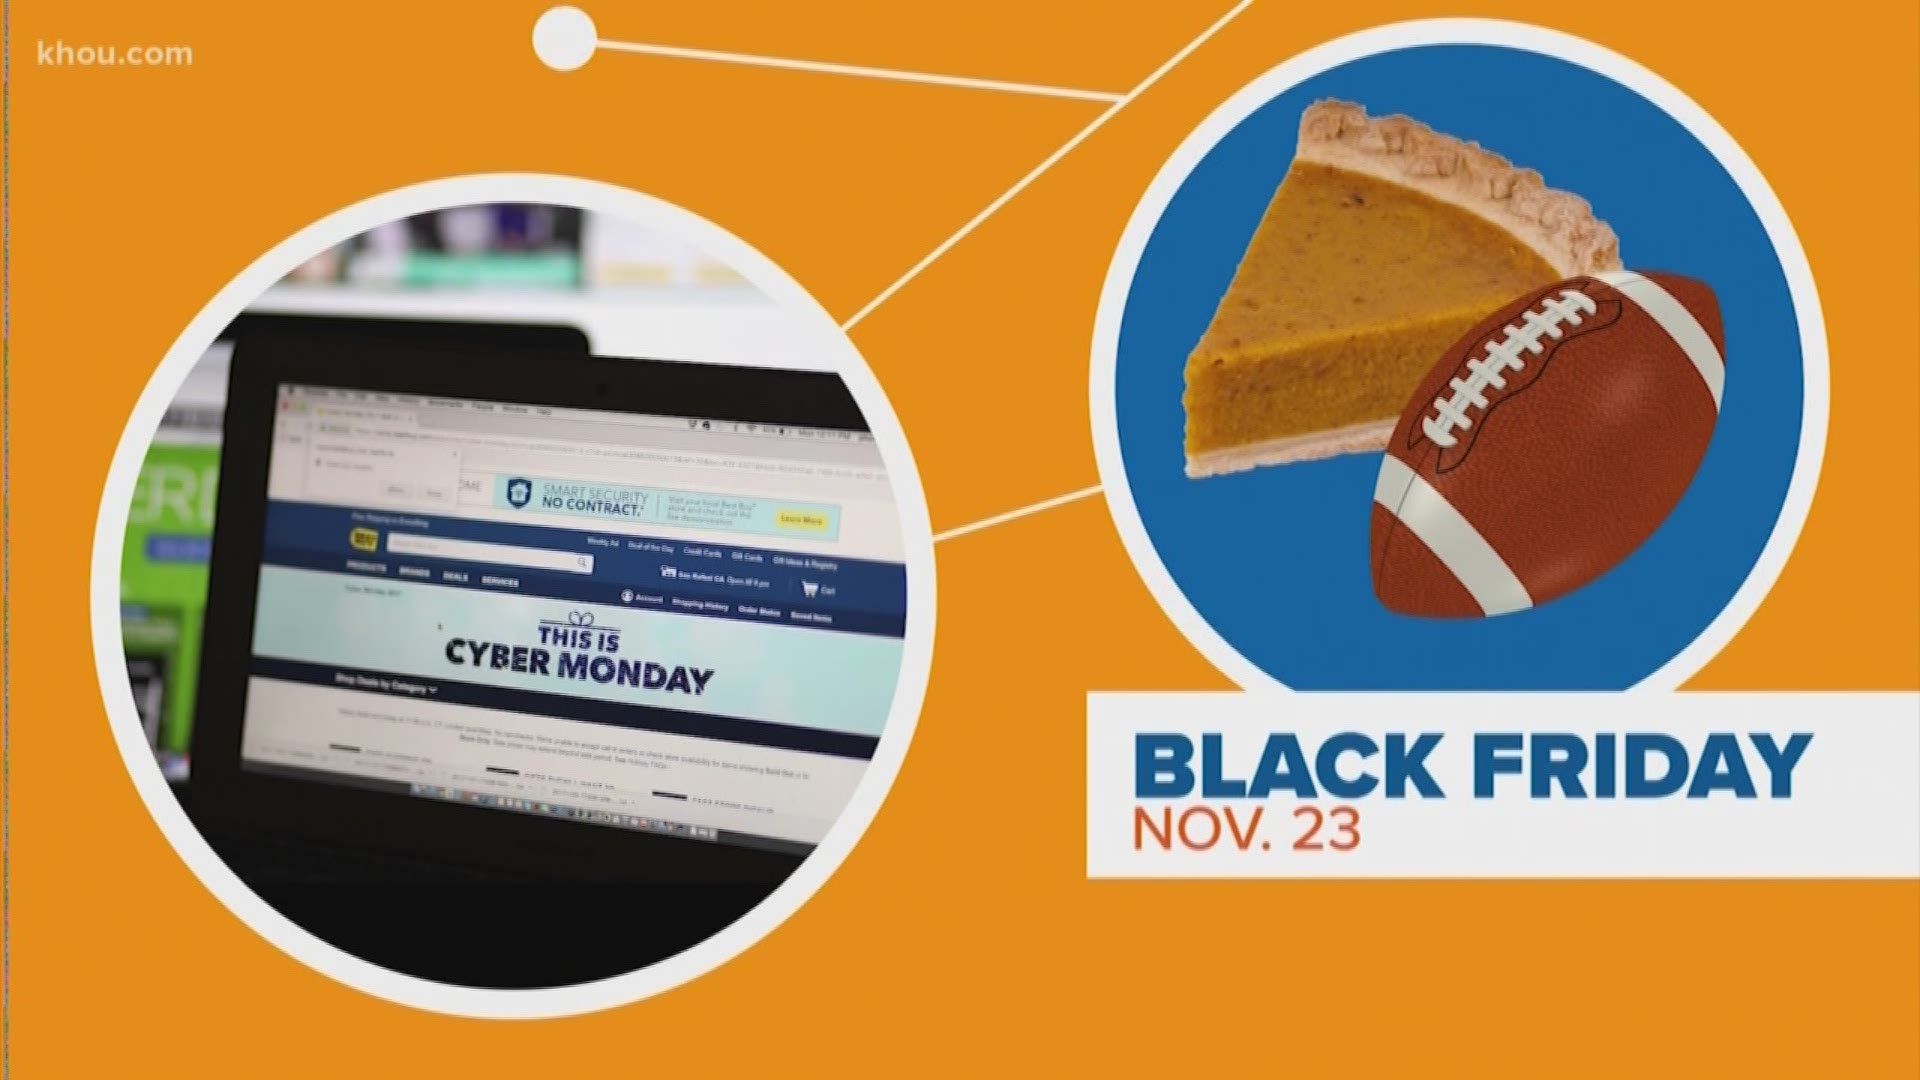 Did you do your shopping on Black Friday, or did you wait for the Cyber Monday deals? Our Tiffany Craig connects the dots on how today became one of the biggest shopping days of the year.